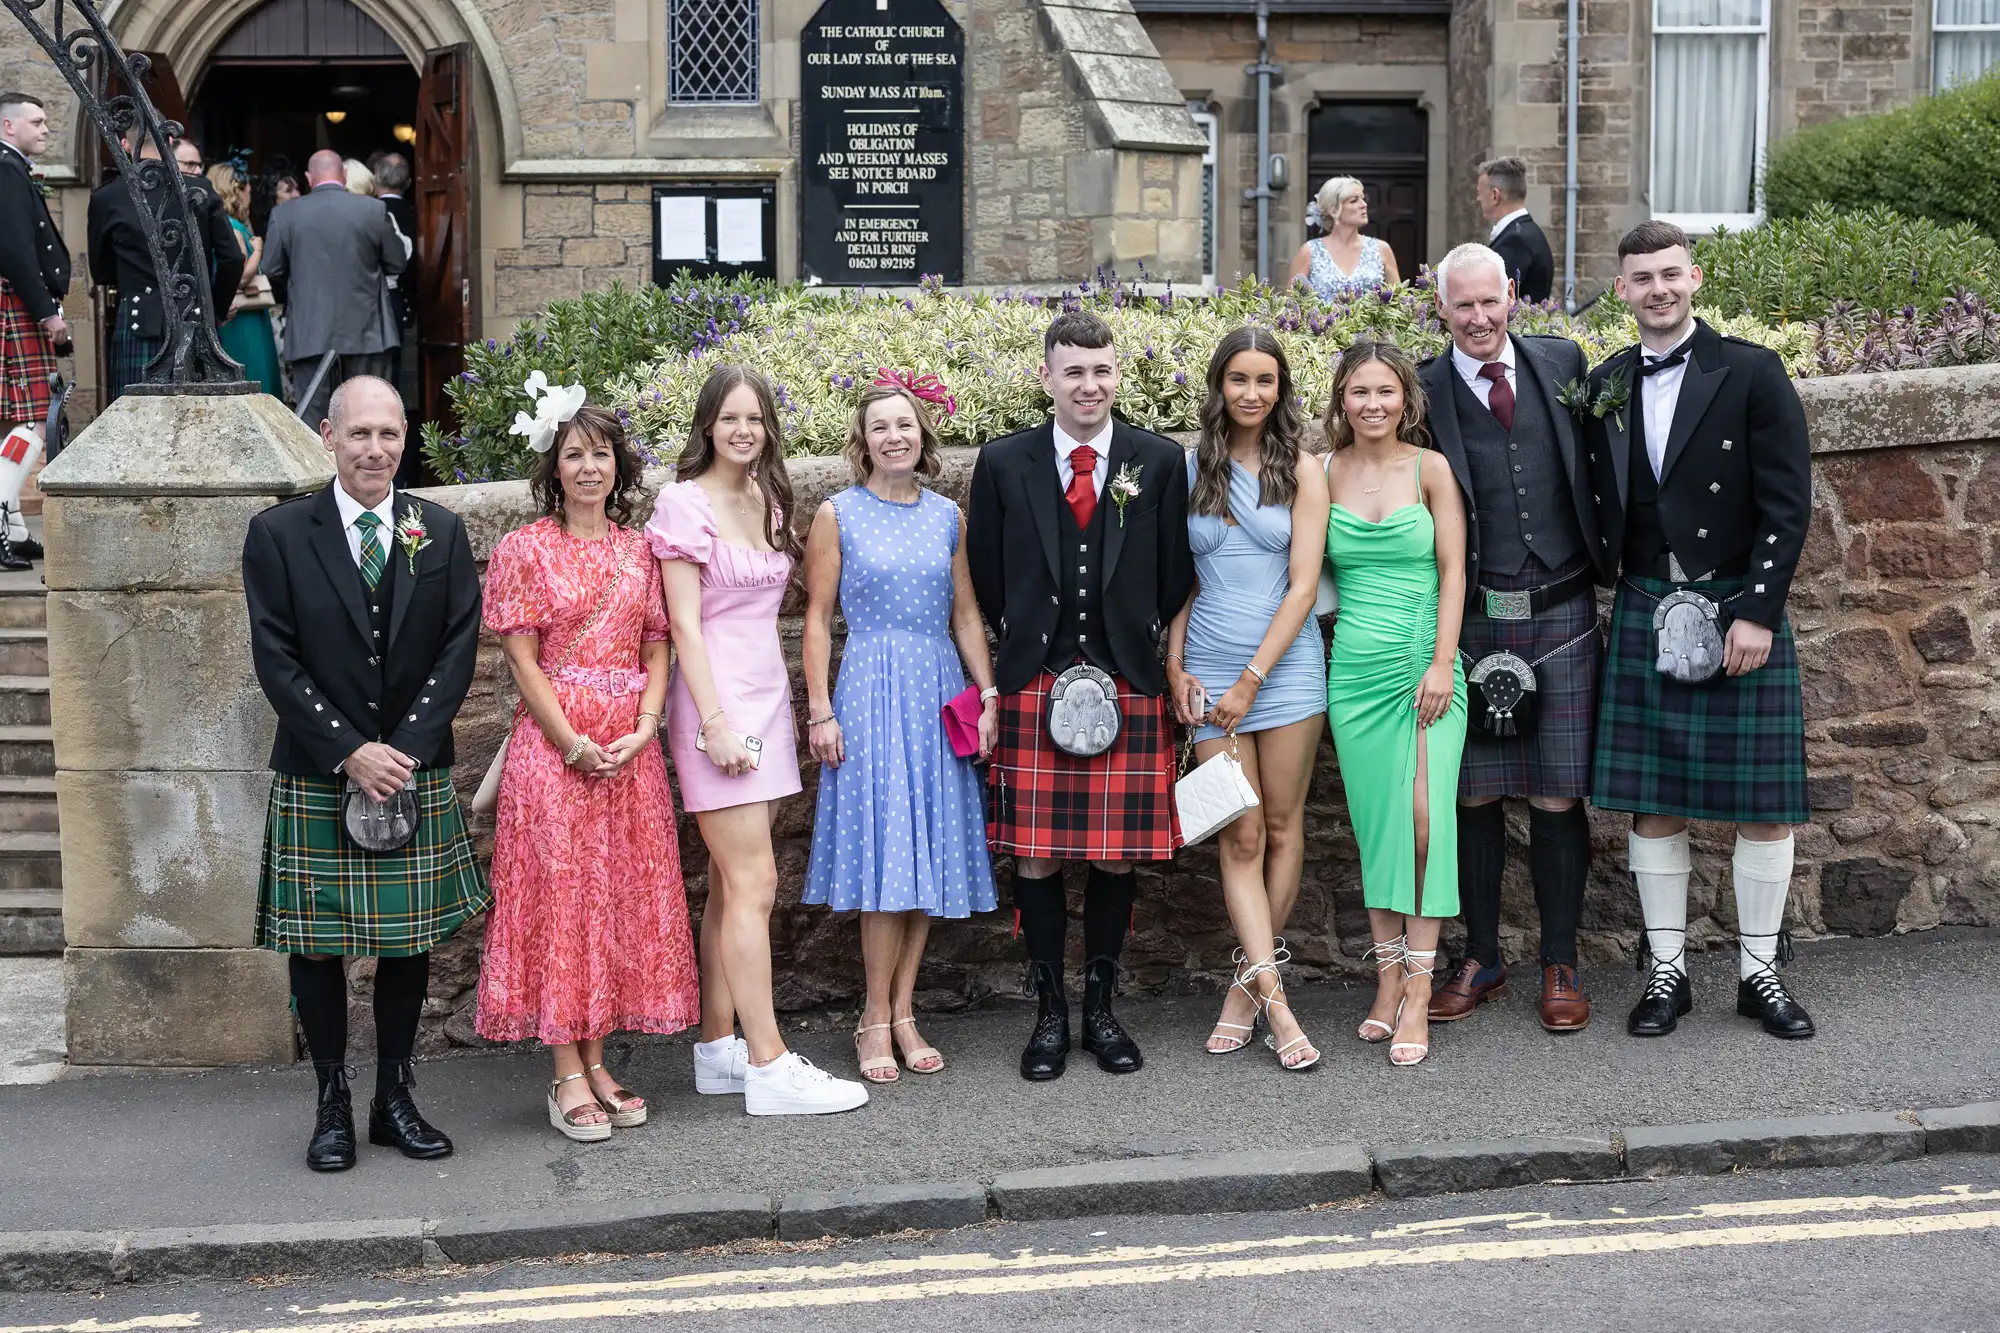 A group of nine people dressed semi-formally, with some men in kilts, posing outside a church entrance.